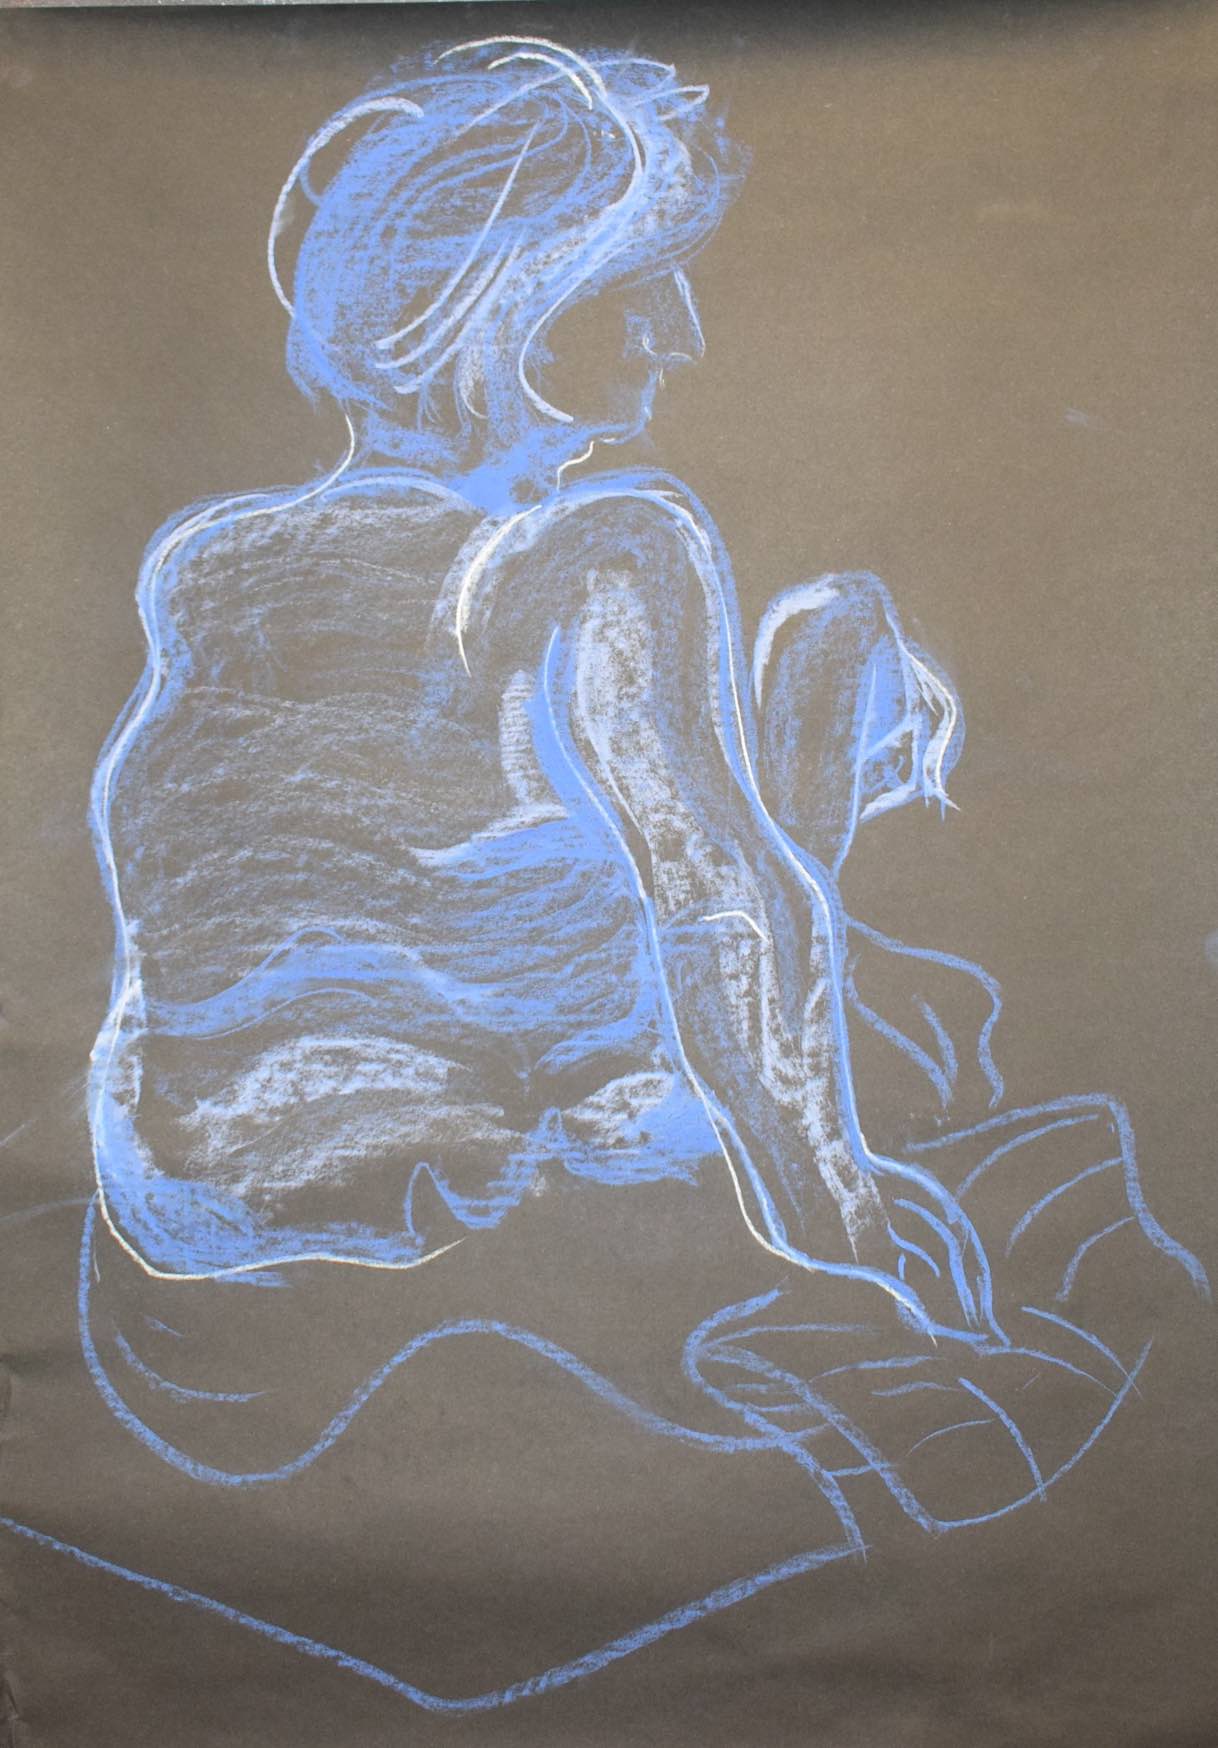 Drawing of seated human figure seen from behind